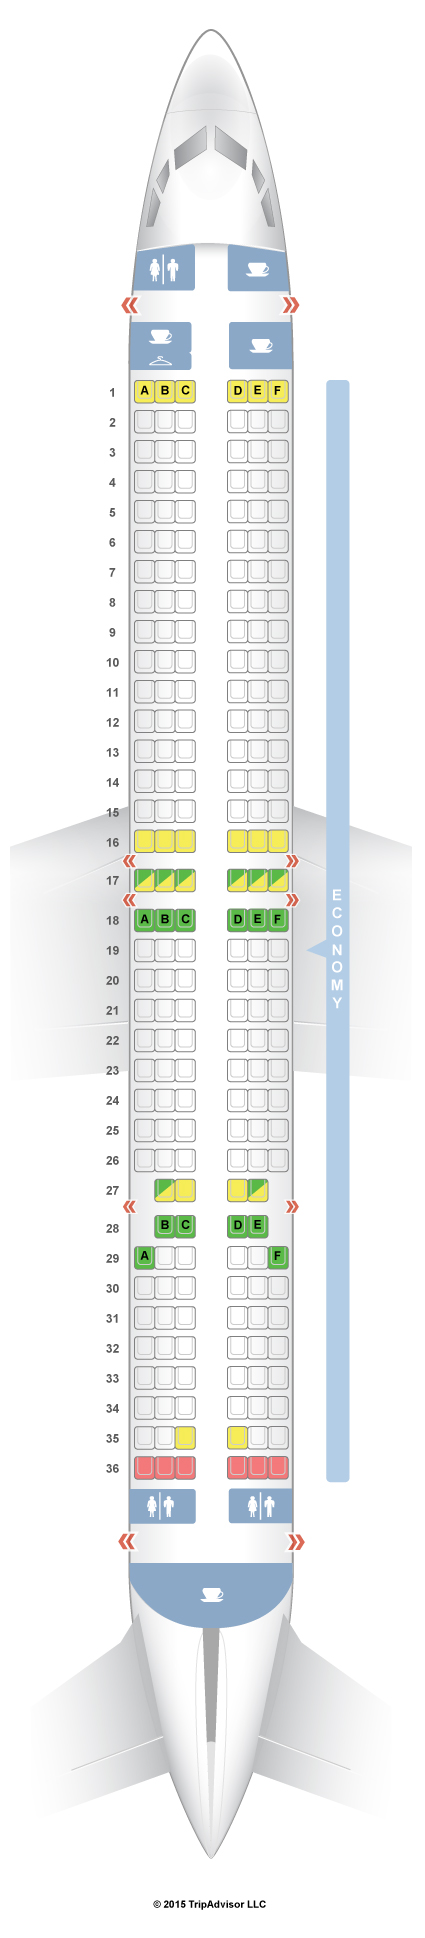 Boeing 739 Seating Chart